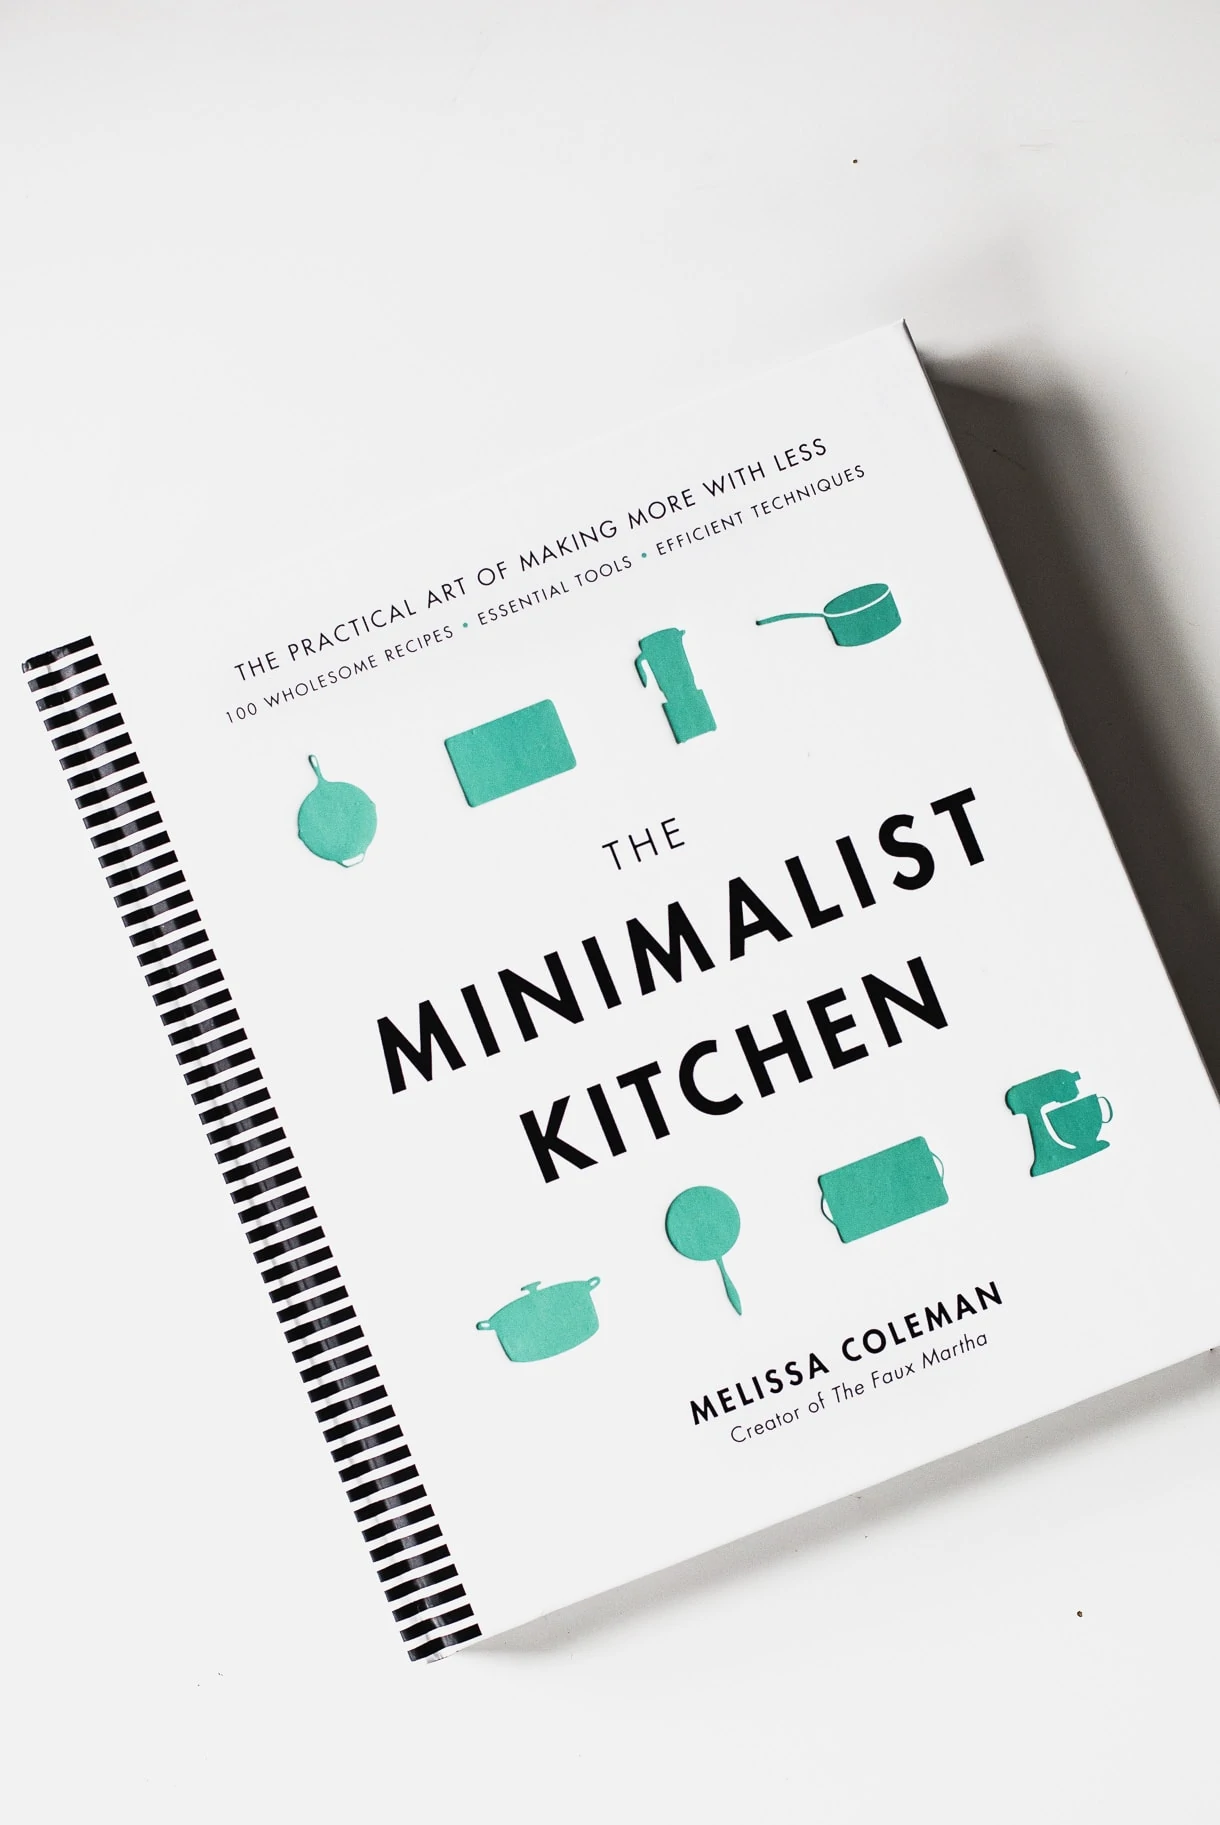 The Minimalist Kitchen book, by Melissa Coleman, The Faux Martha